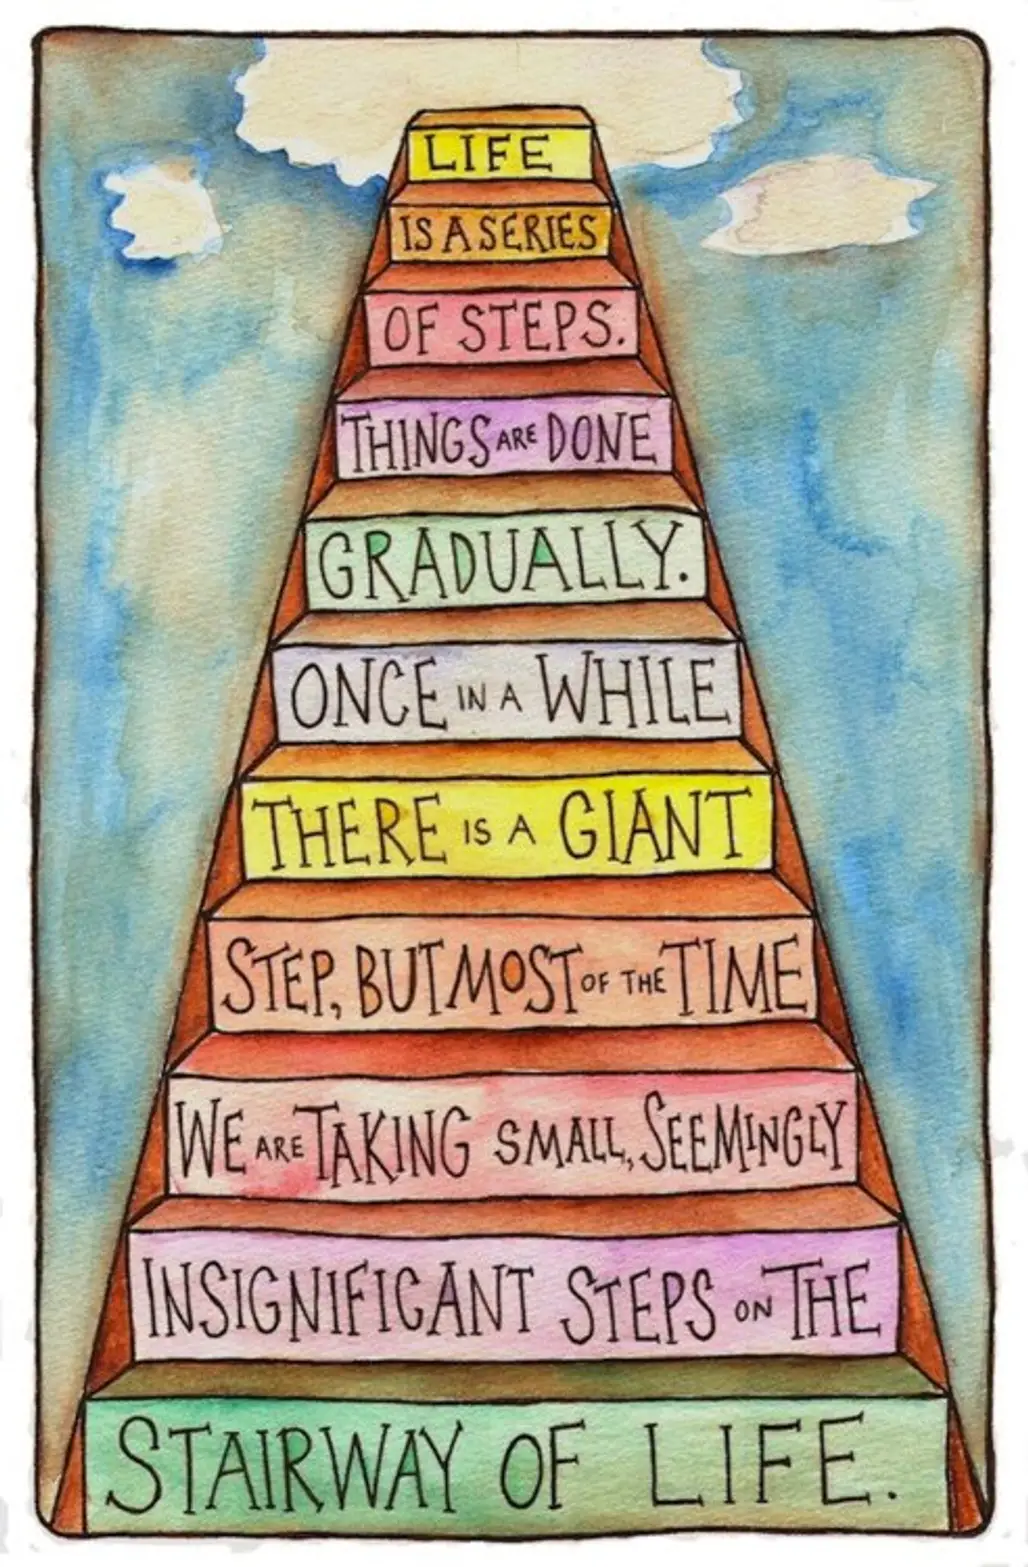 The Stairway of Life